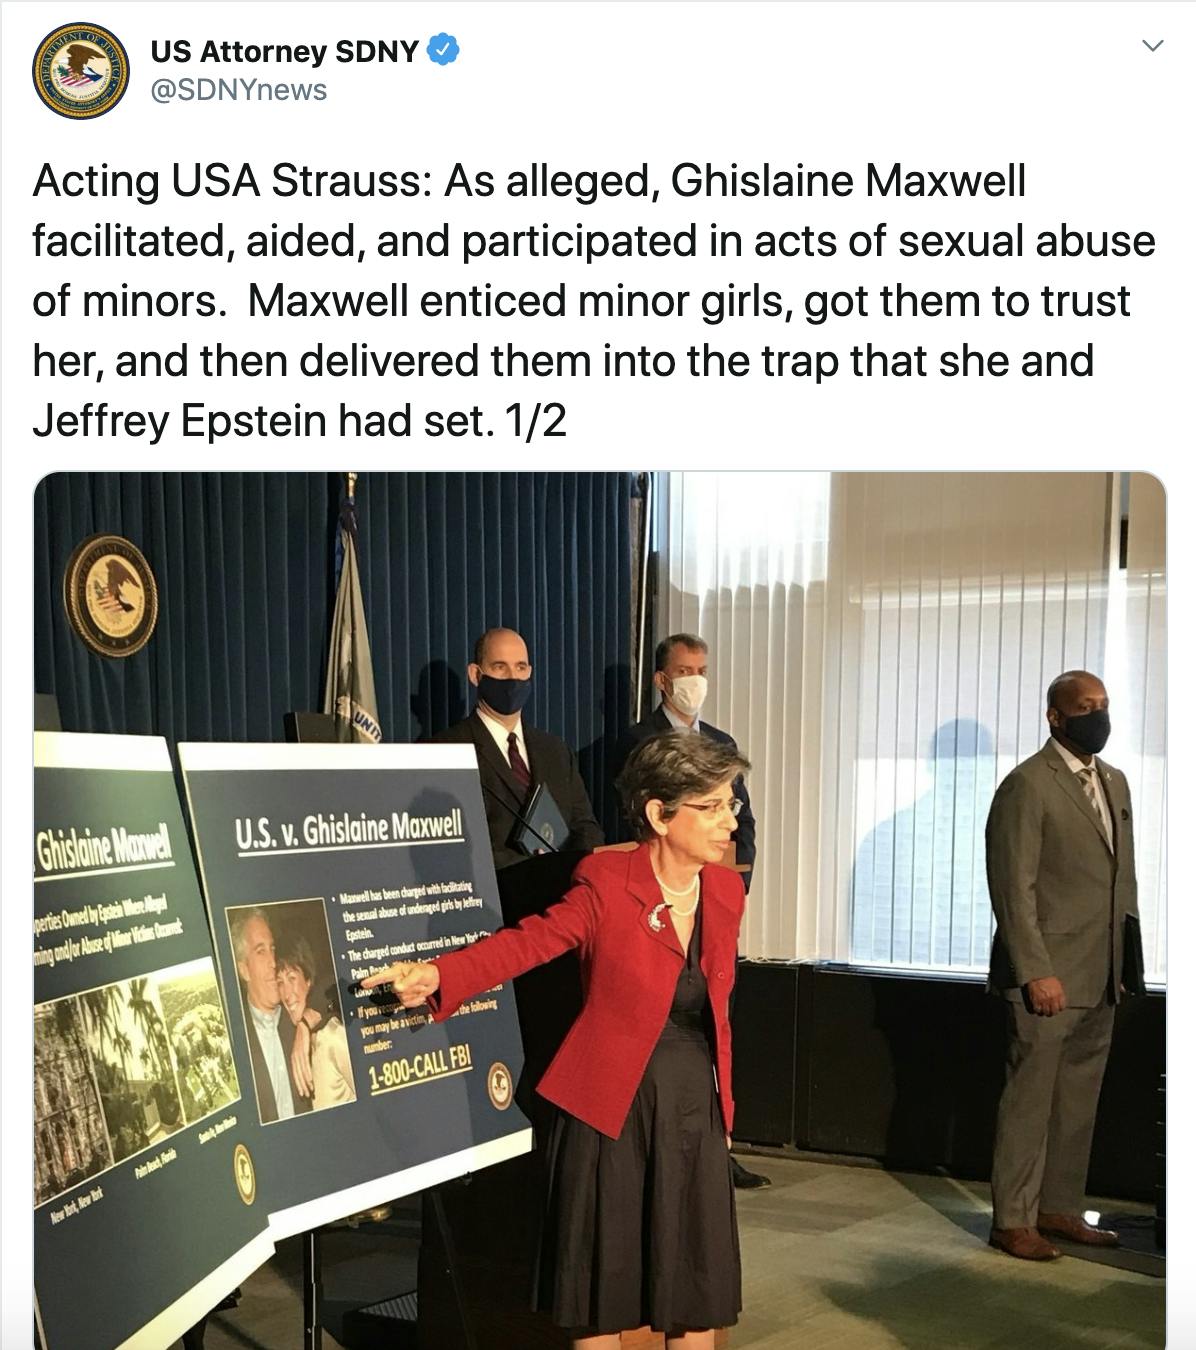 Acting USA Strauss: As alleged, Ghislaine Maxwell facilitated, aided, and participated in acts of sexual abuse of minors.  Maxwell enticed minor girls, got them to trust her, and then delivered them into the trap that she and Jeffrey Epstein had set. 1/2